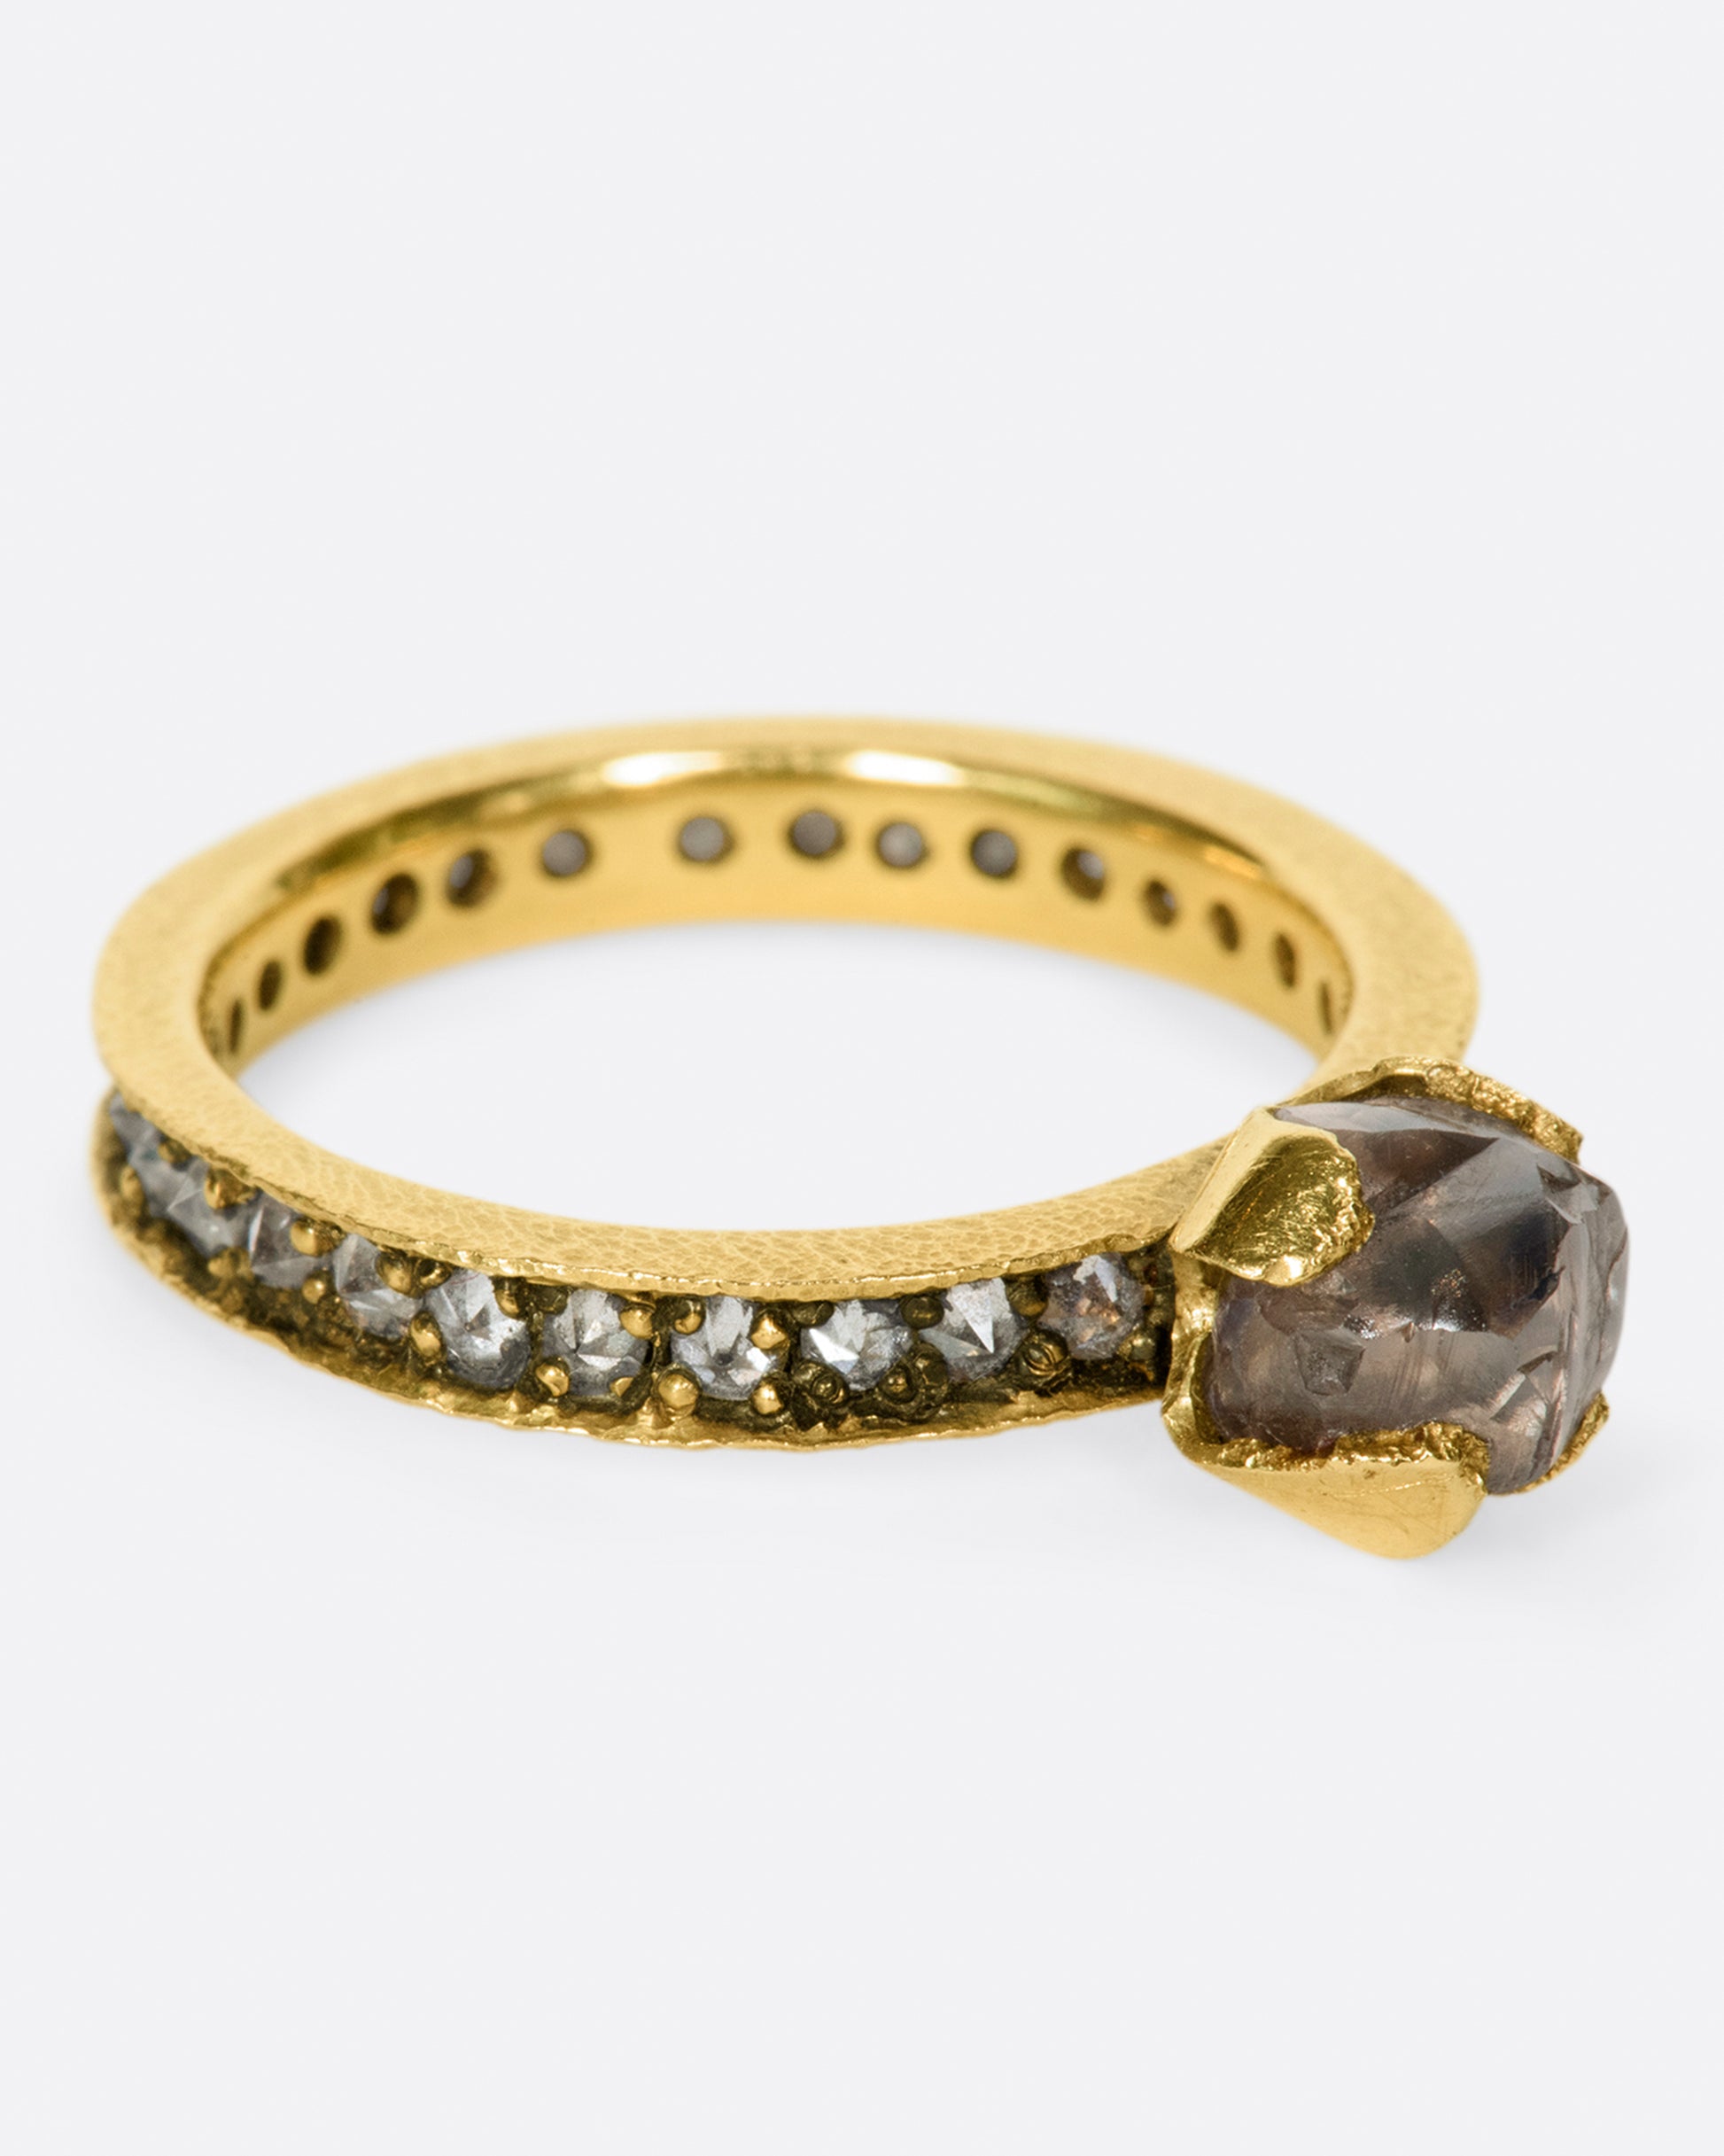 A yellow eternity band with inverted diamonds, crowned by a prong set raw yellow diamond.